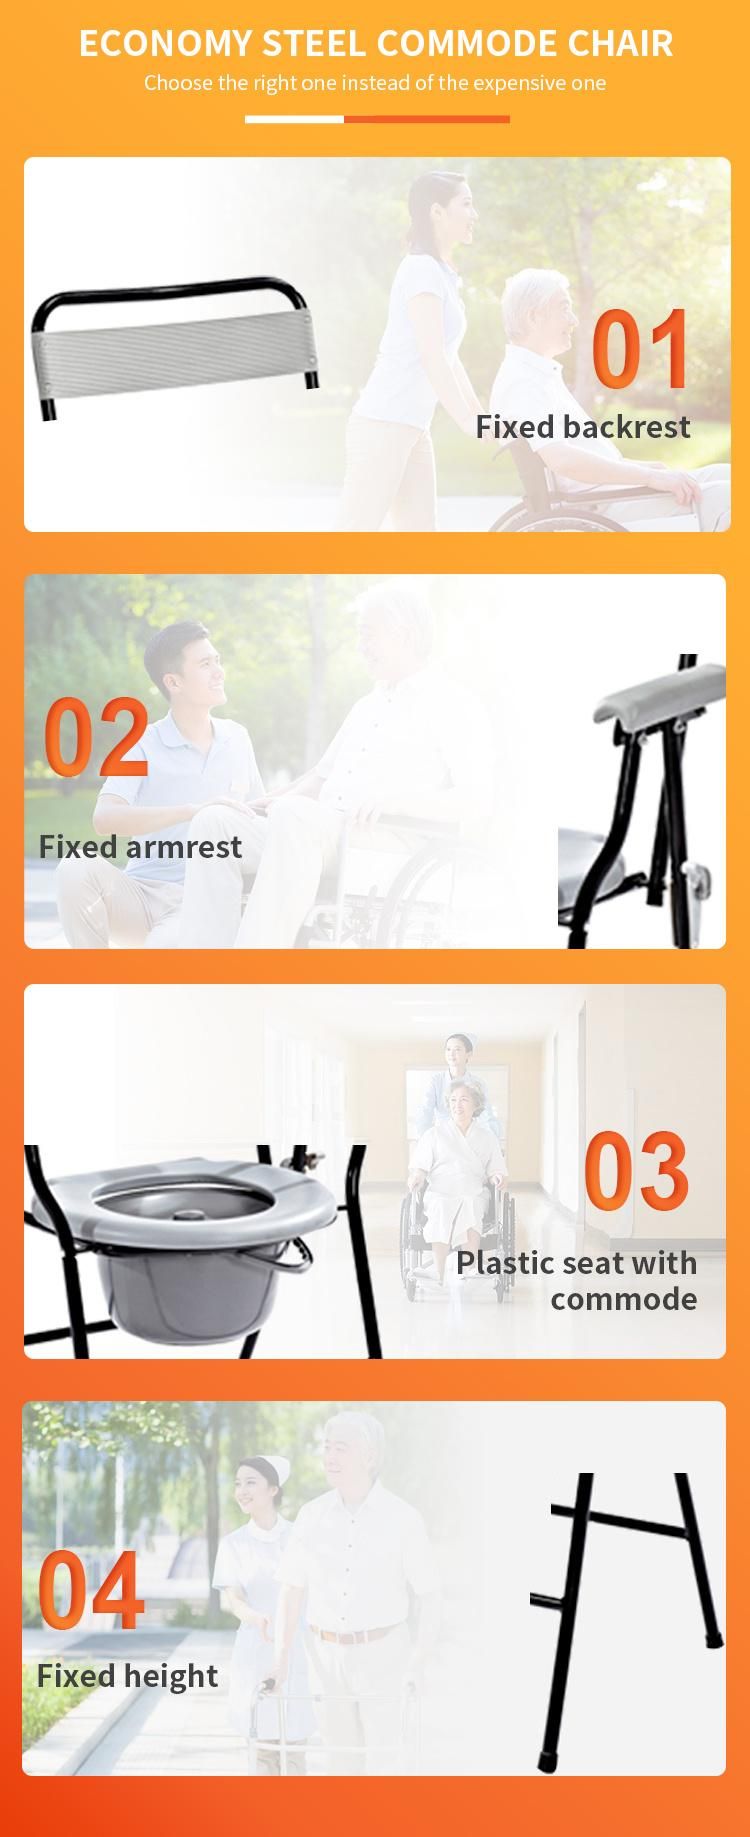 Economy Cheap Price Easy Carry Can Fold 4PCS/Ctns Hot Selling Commode Chair Fs899 Commode Chair Folding Type with Lock